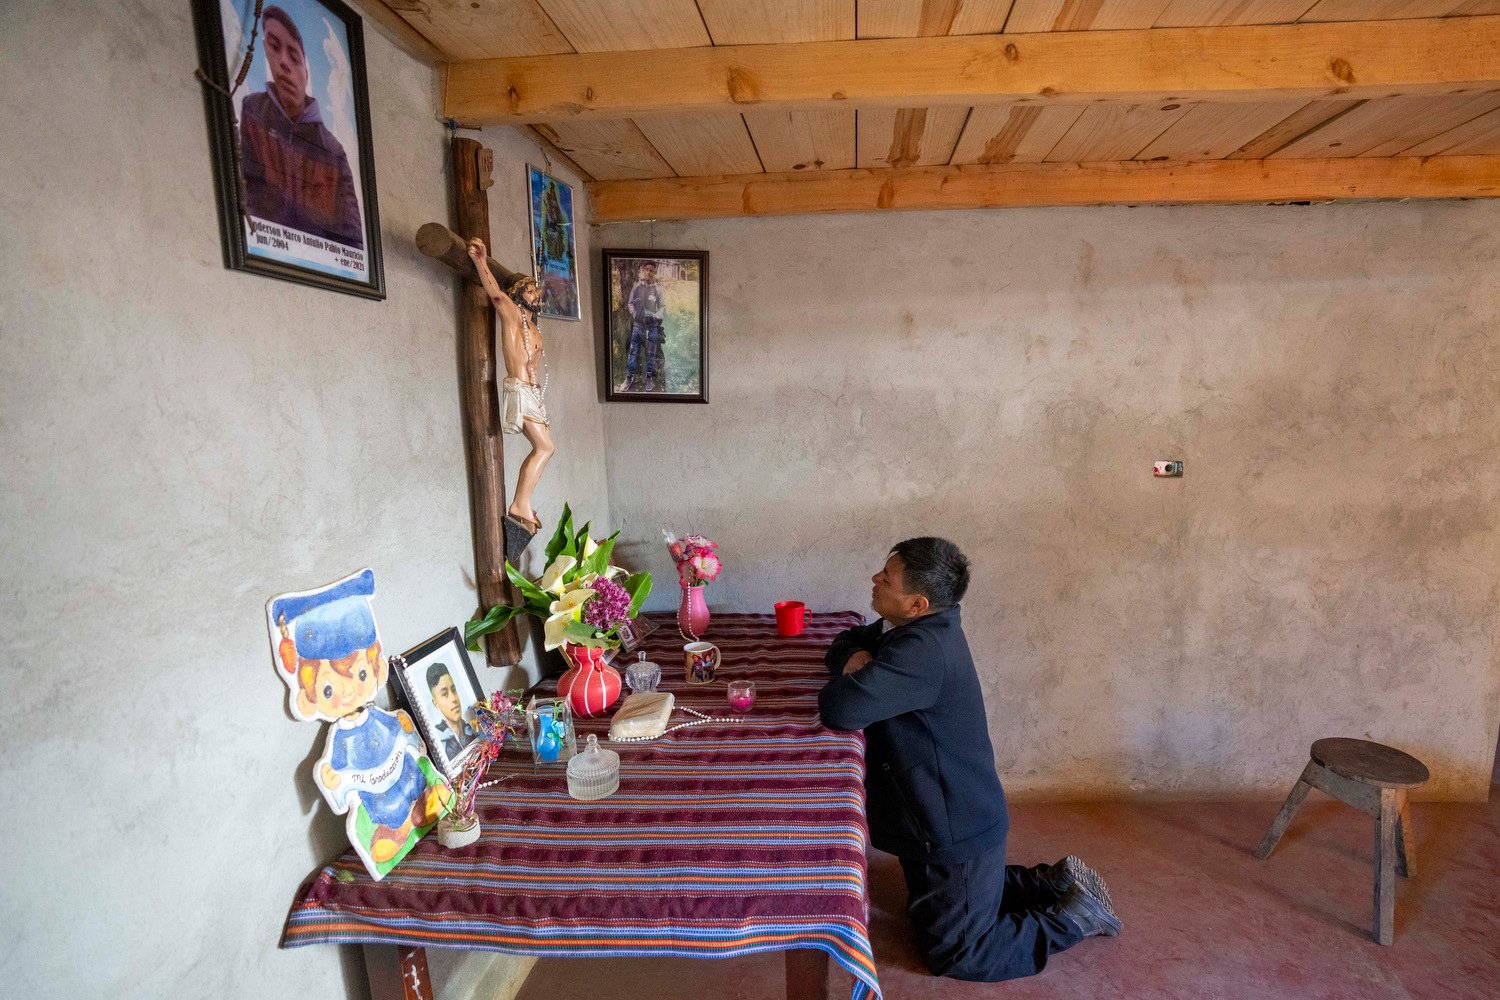  Marco Antulio Pablo Perez prays at an altar for his son Anderson Pablo who died trying to migrate to the U.S. in Comitancillo, Guatemala, March 20, 2024. The 16-year-old died among the migrants who were shot and set afire by rogue police officers in